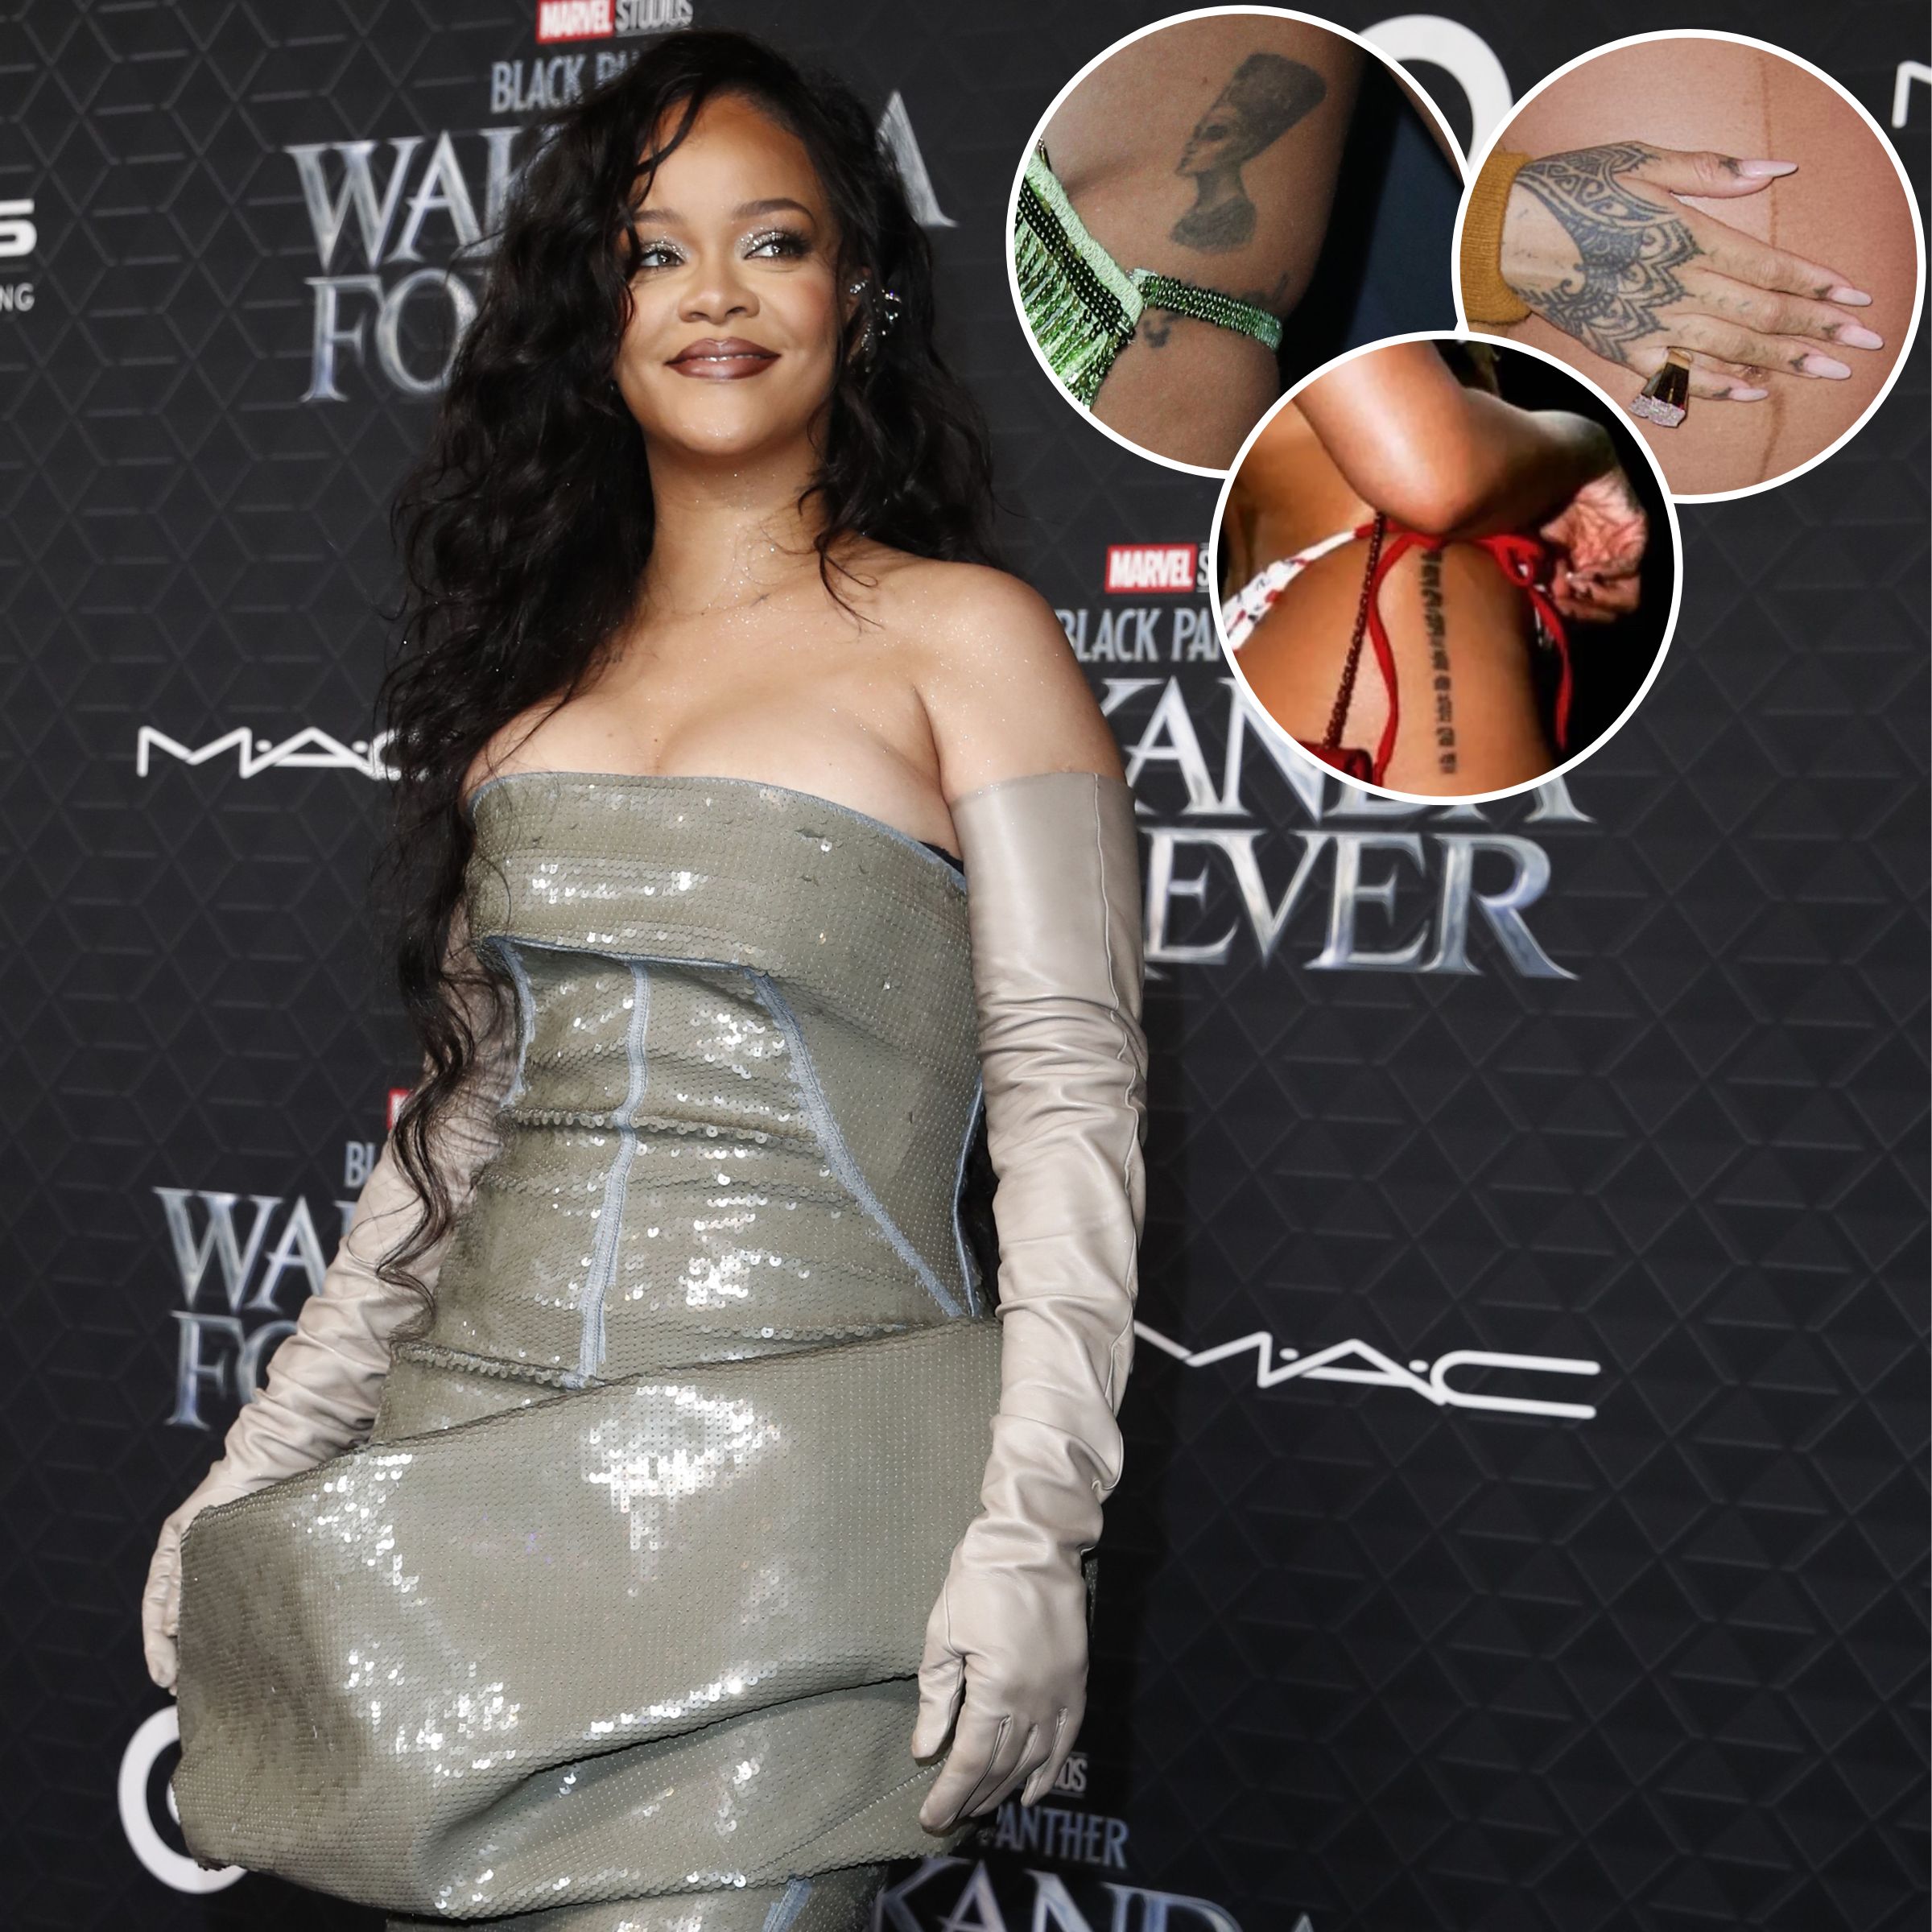 Want A Tattoo Like Those Of Rihannas Check It Out  Love to Care Skin